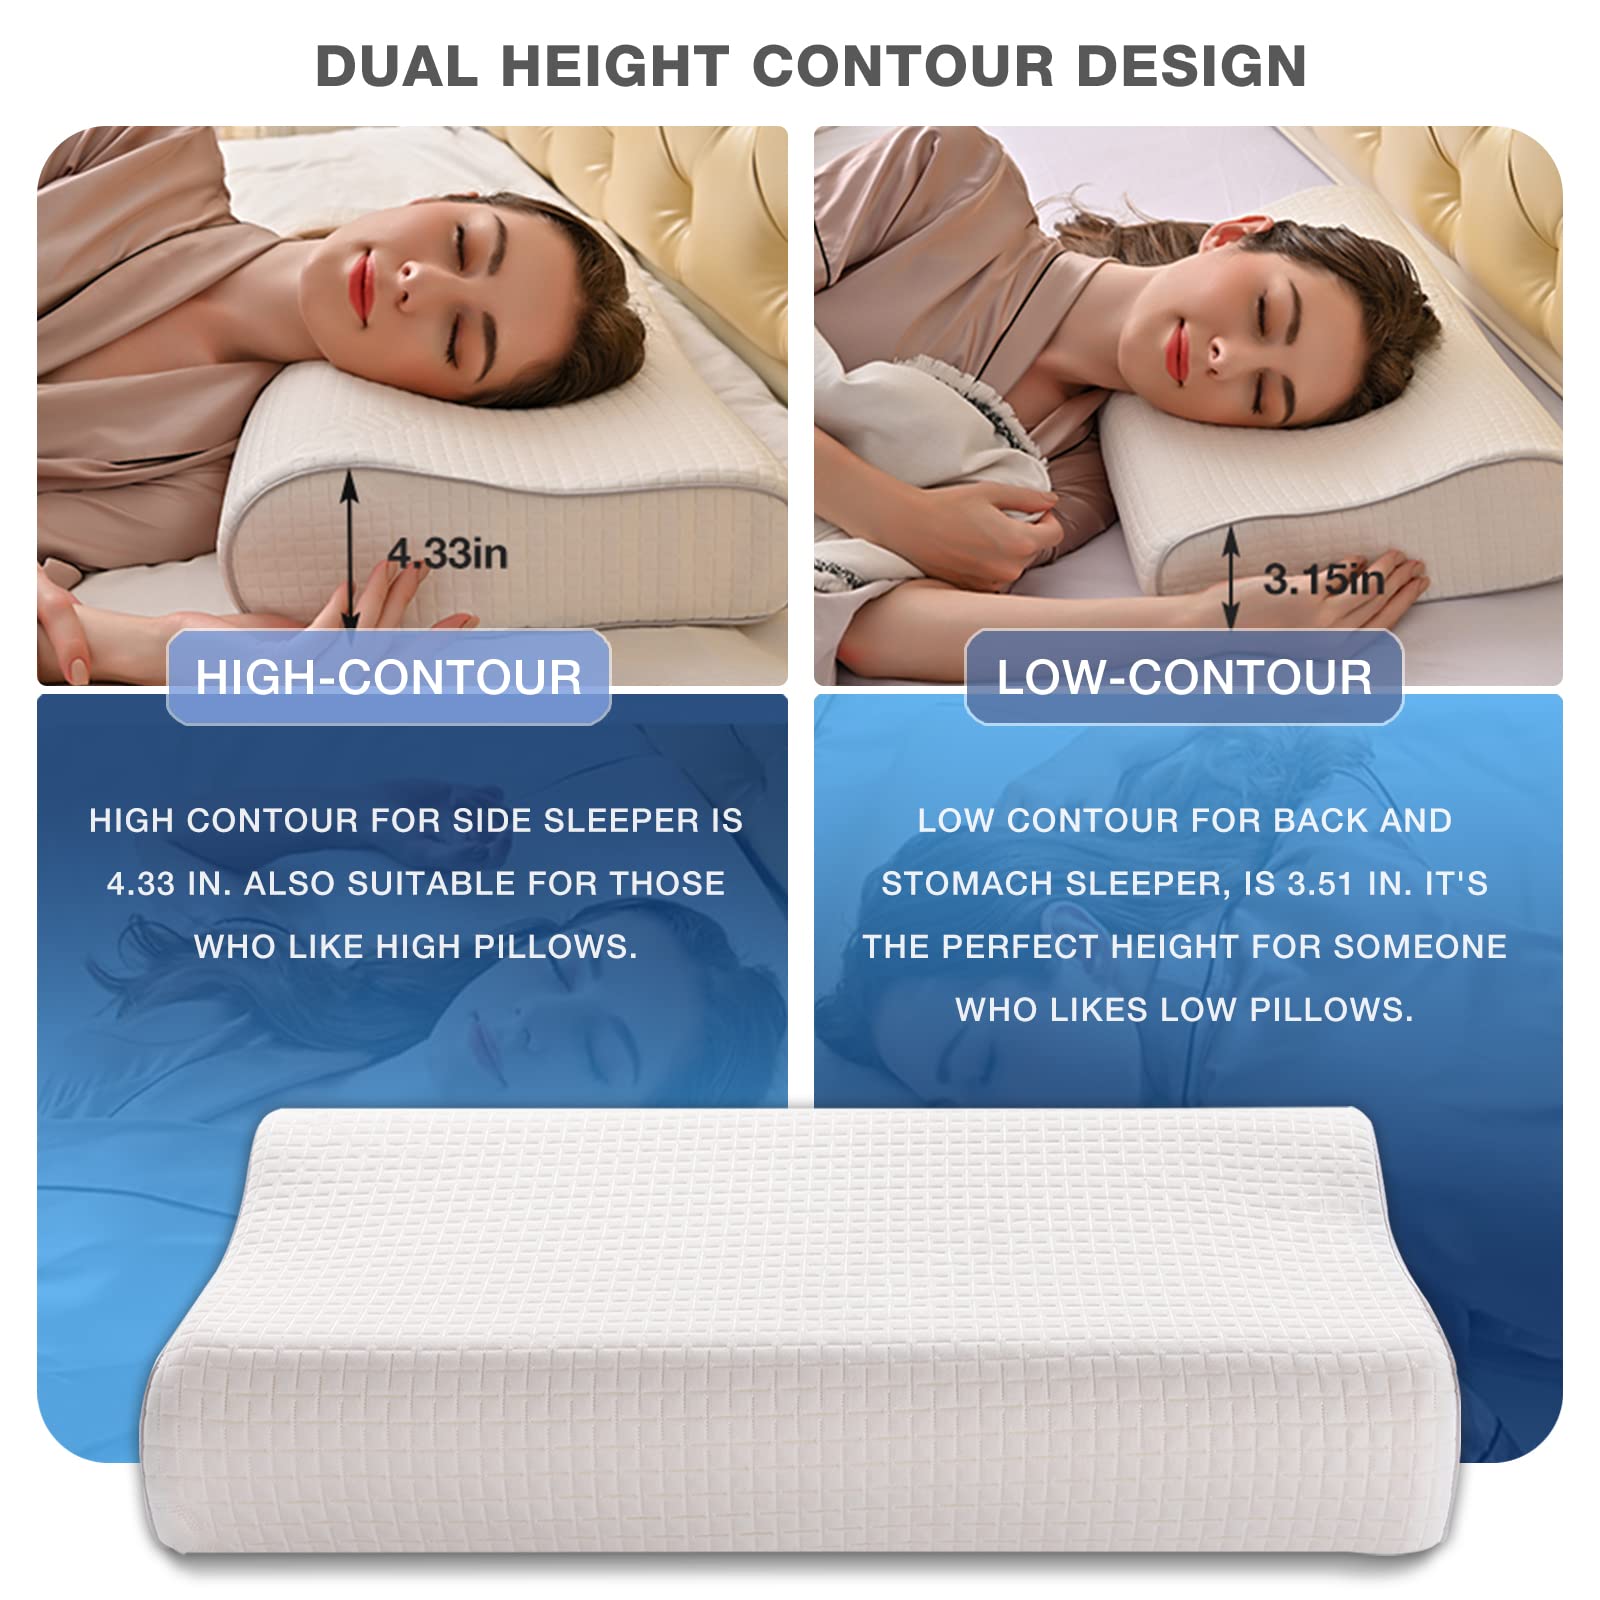 UlikTree Memory Foam Pillow for Neck and Shoulder Pain Washable Cover Cooling Standard Size Bed for Back, Side,Stomach Sleepers Provides Deeper Sleep